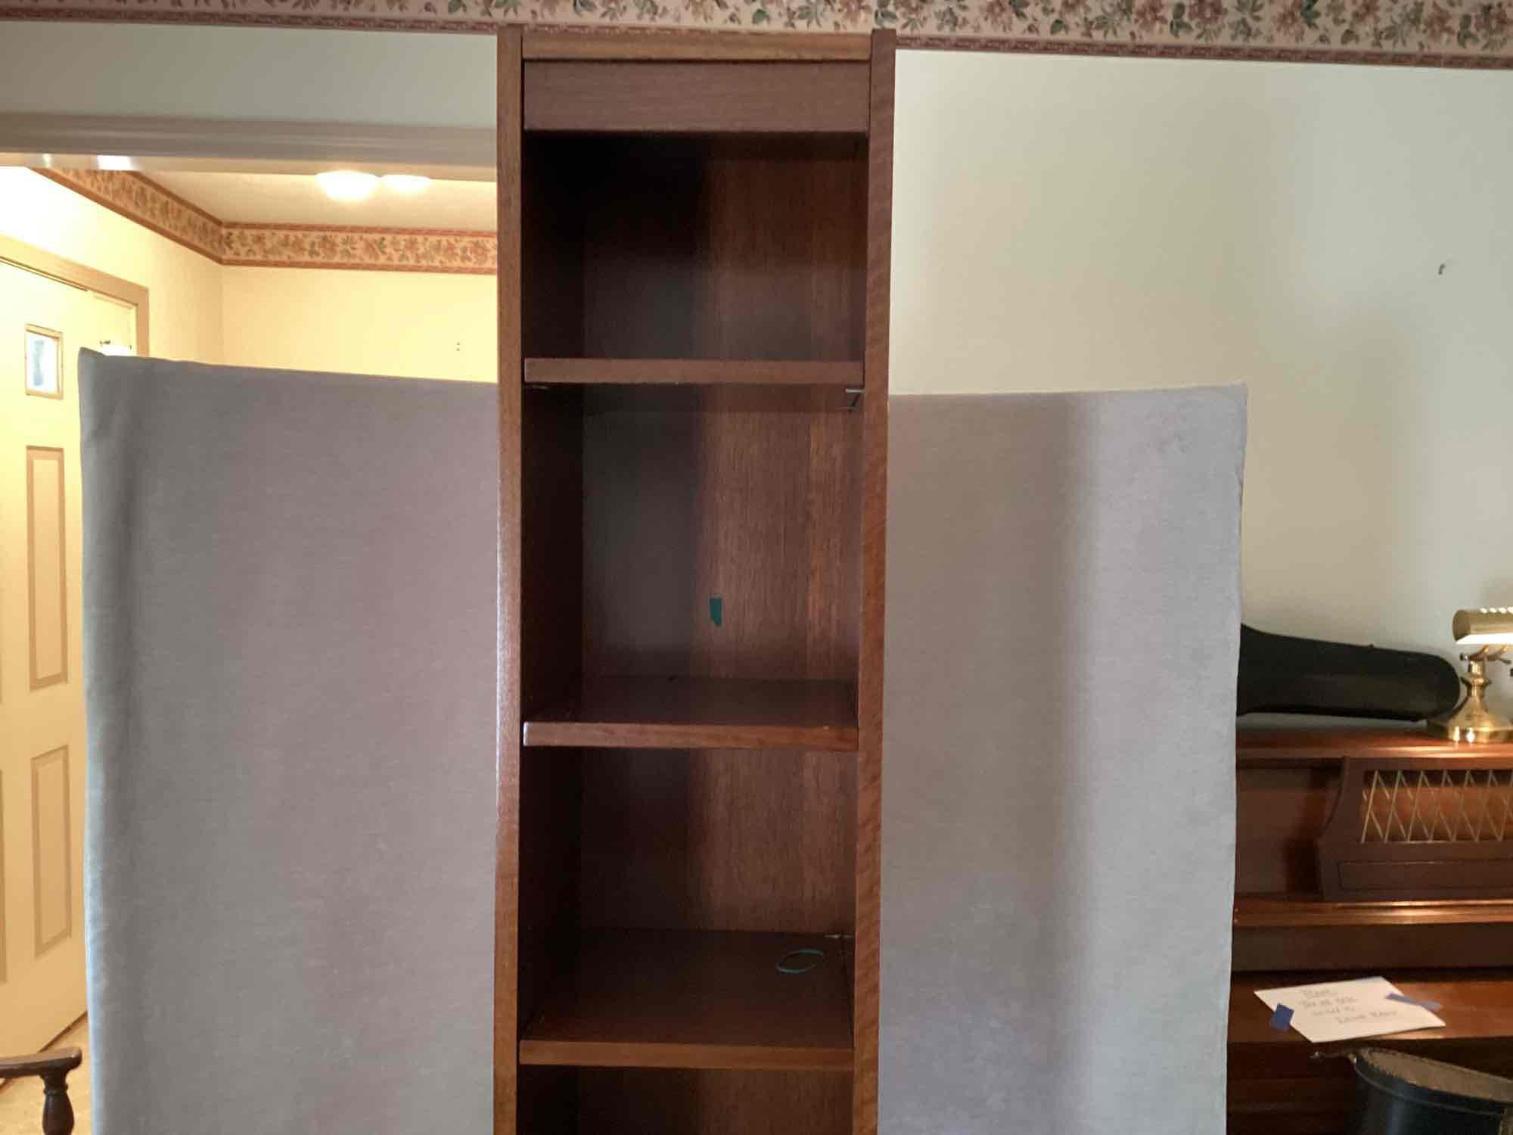 Image for Bookcase